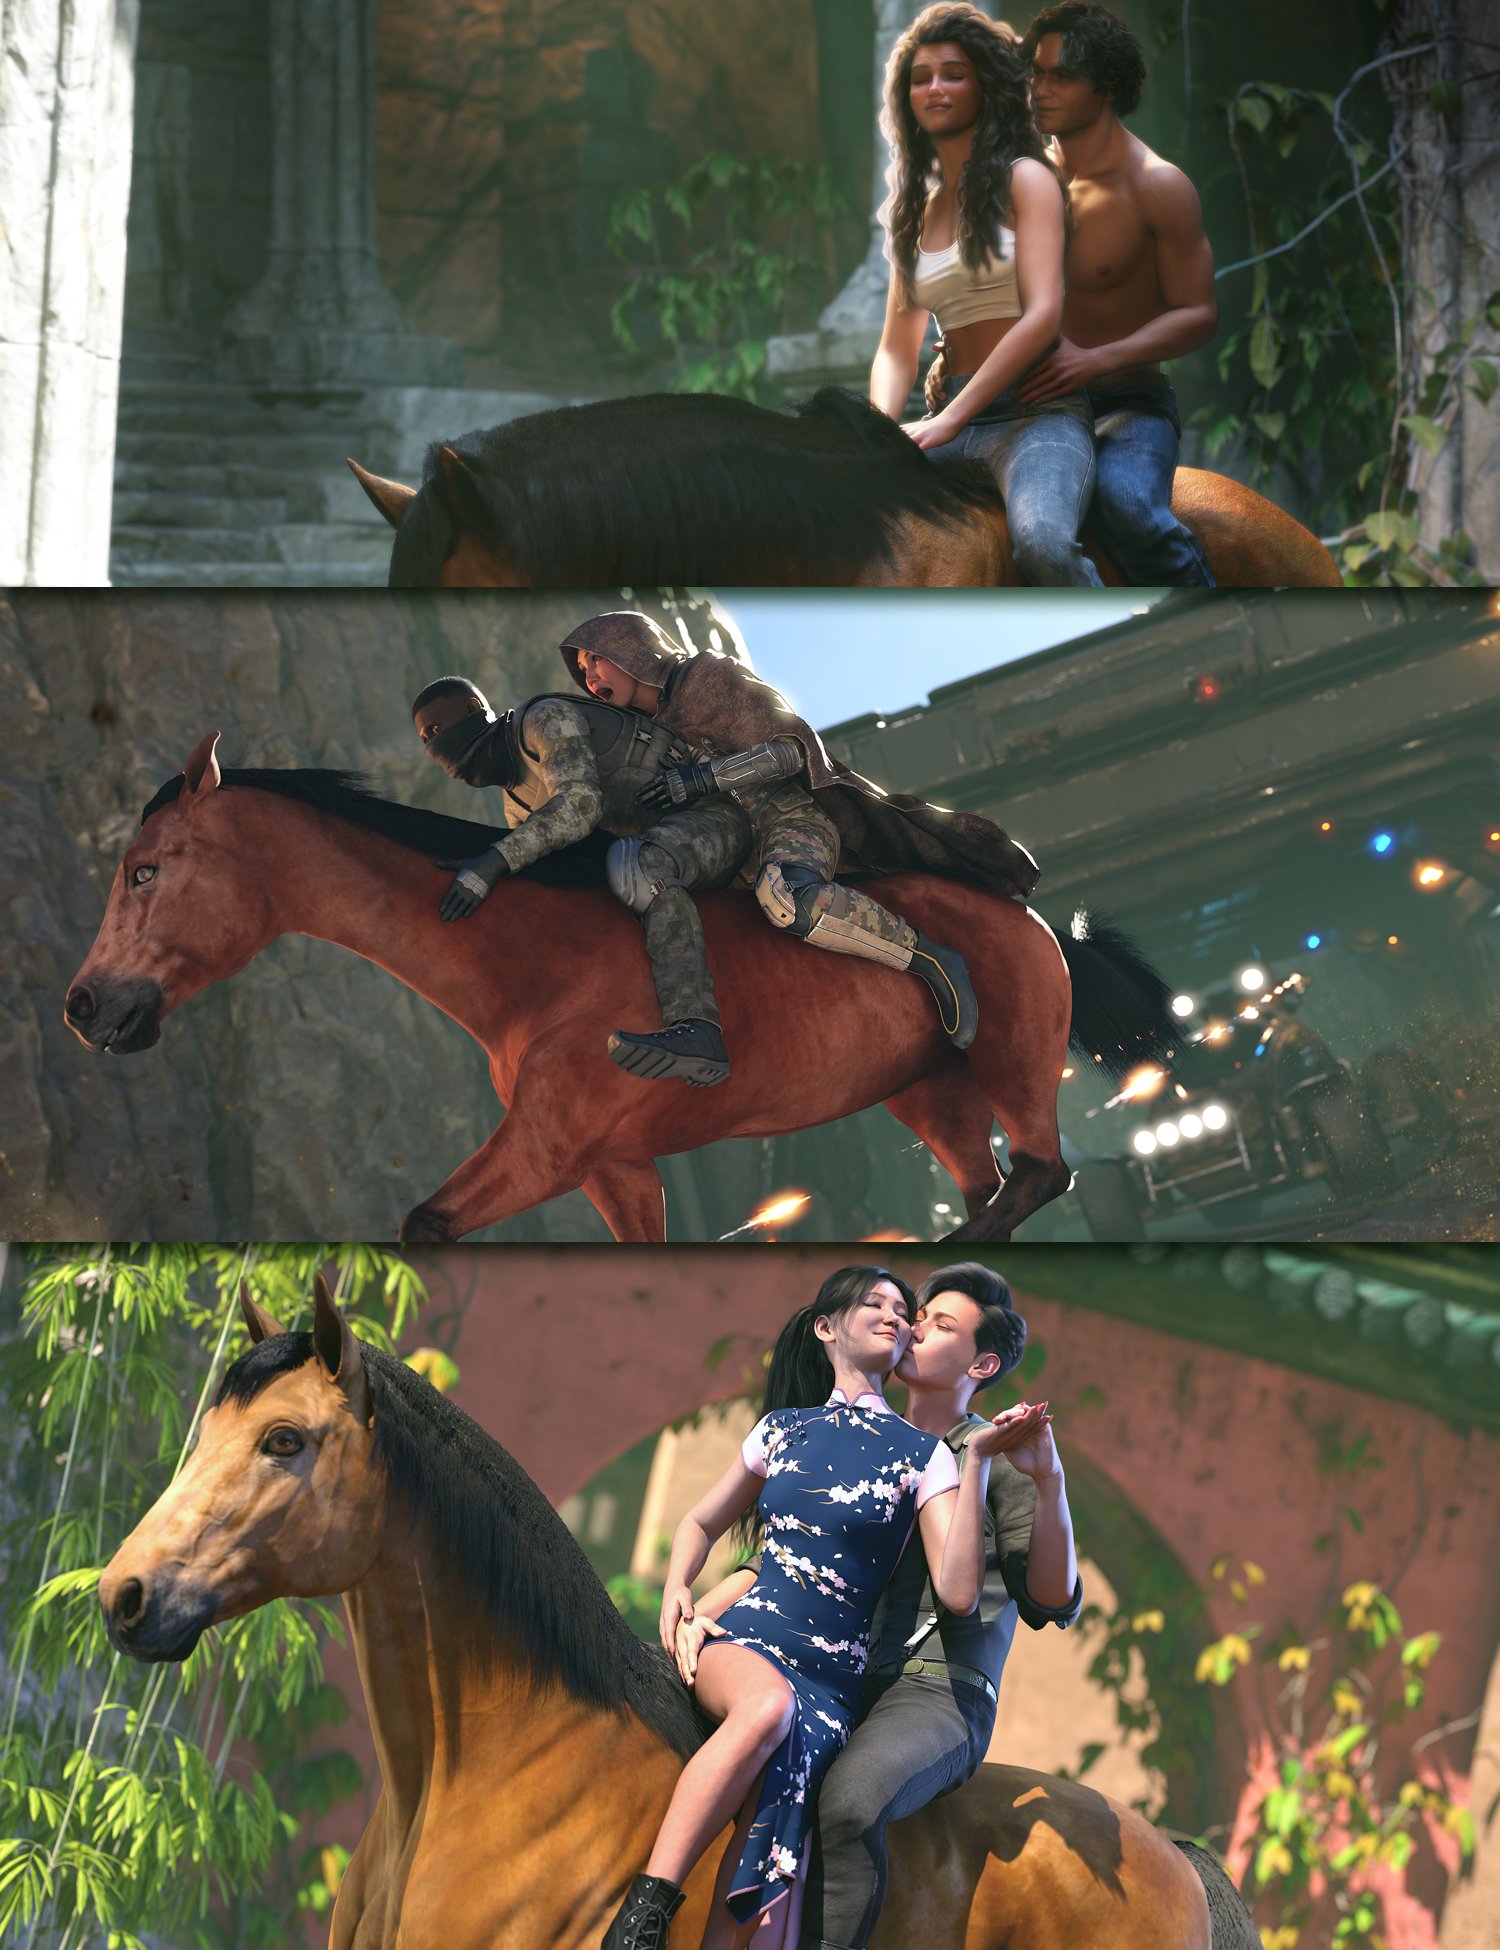 Couple's Horseback Riding Poses for DAZ Horse 3 and Genesis 9 by: Devon, 3D Models by Daz 3D